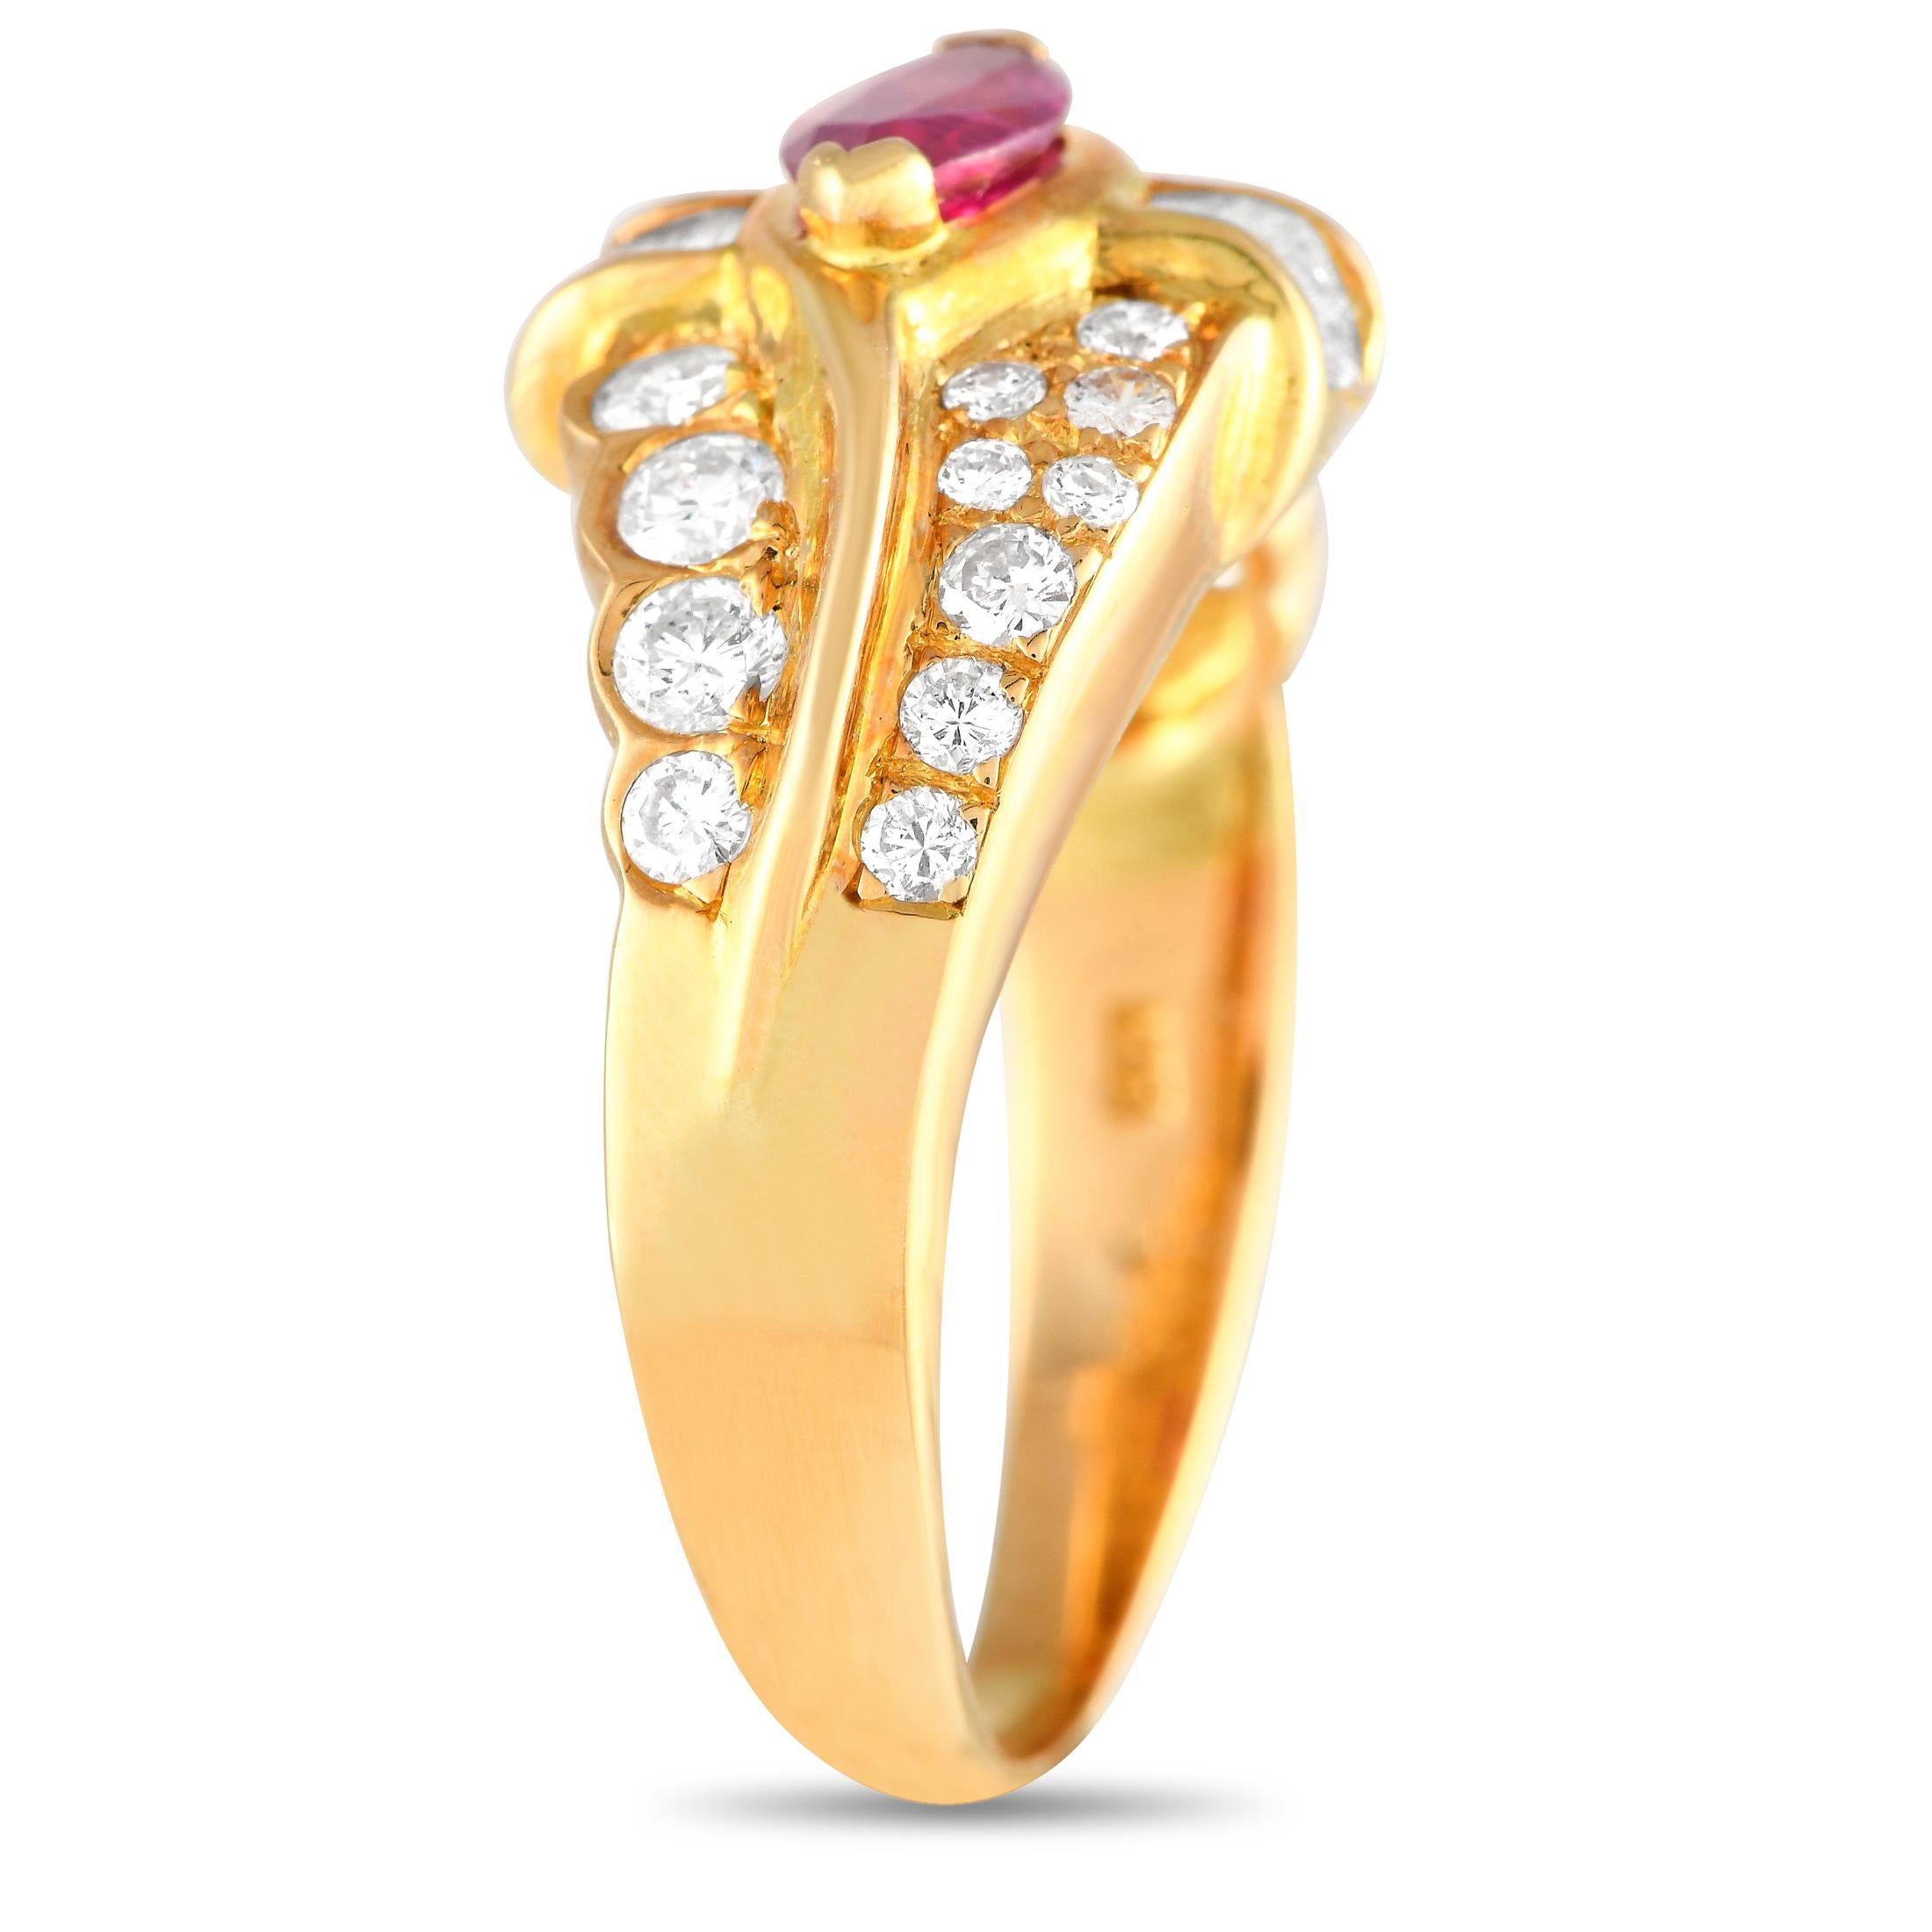 Showcasing stunning balance, this 18K yellow gold ring is sure to make the wearer stare at her hand at every opportunity. The ring offers an exquisite style with its combination of lines and curves, and round and baguette diamonds. Punctuating the